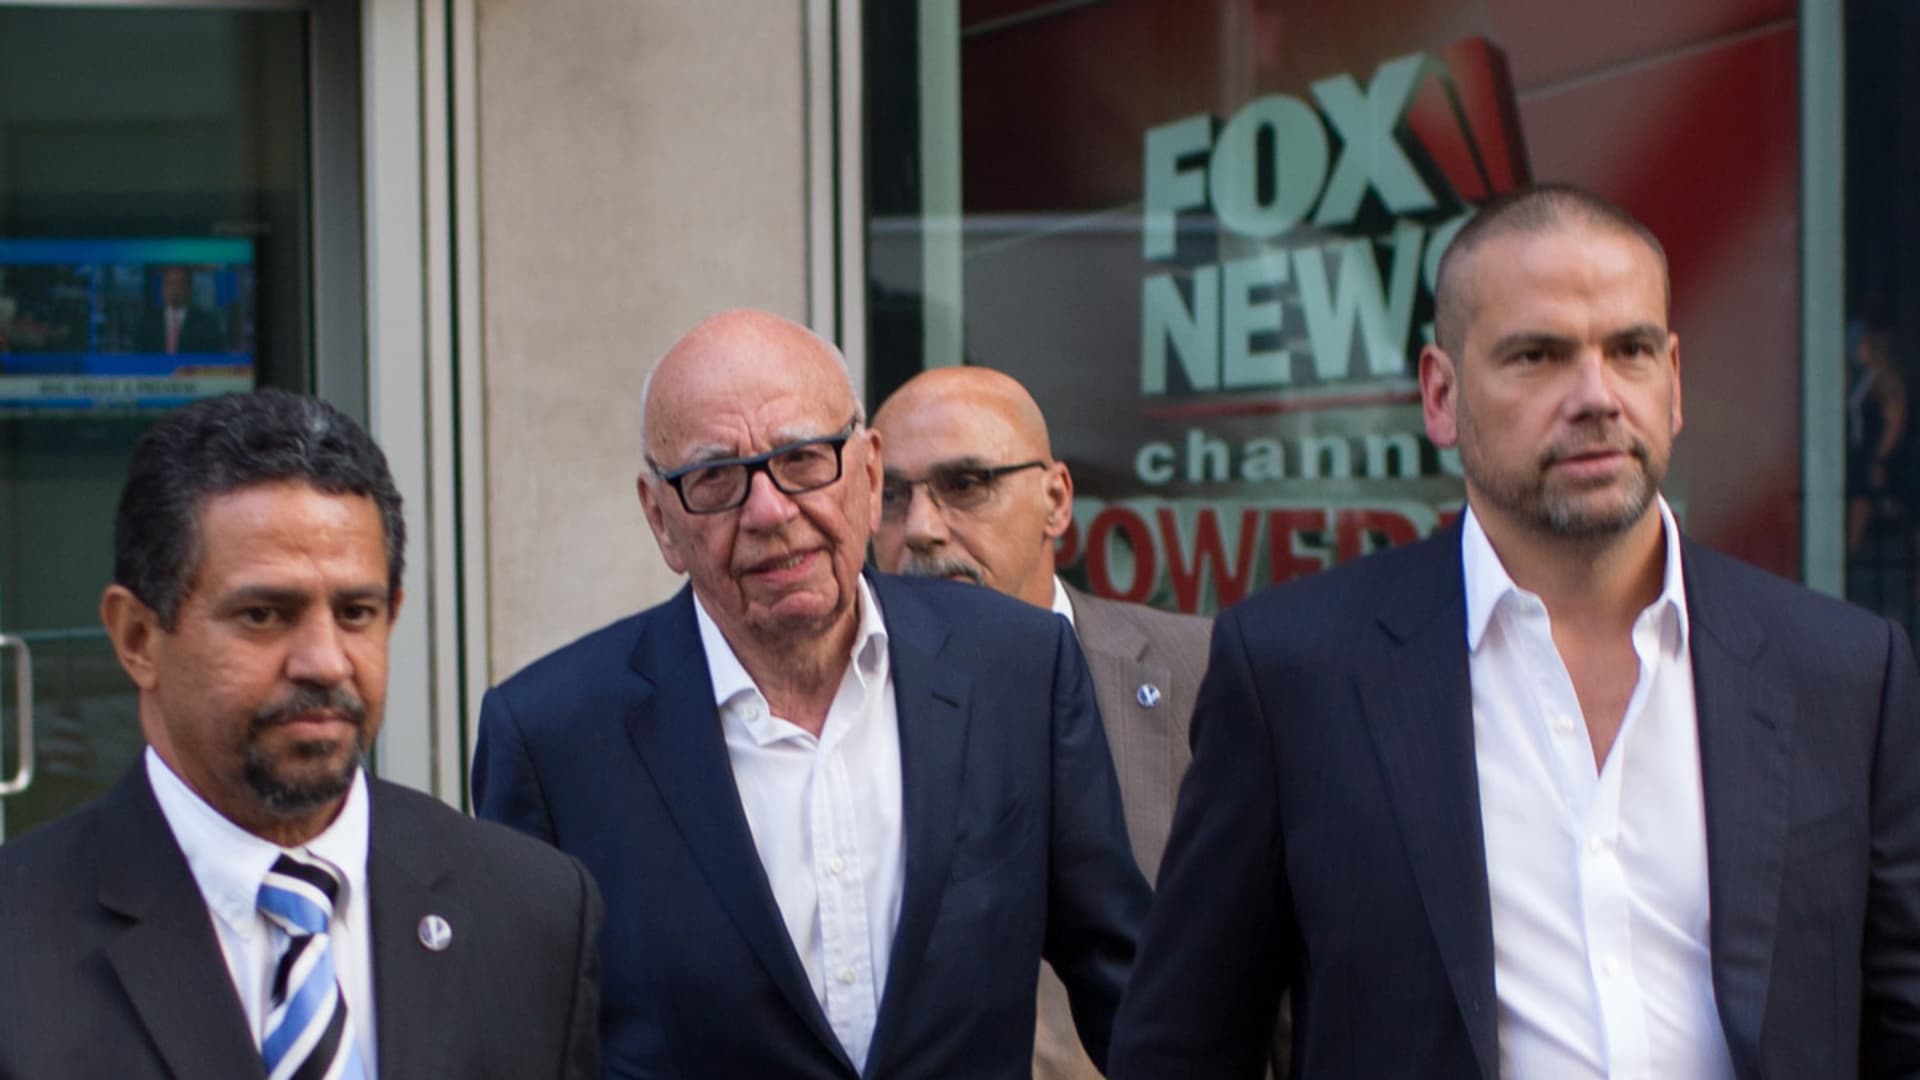 Rupert Murdoch leaves the News Corporation building with his son Lachlan Murdoch (R) on July 21, 2016 in New York City.